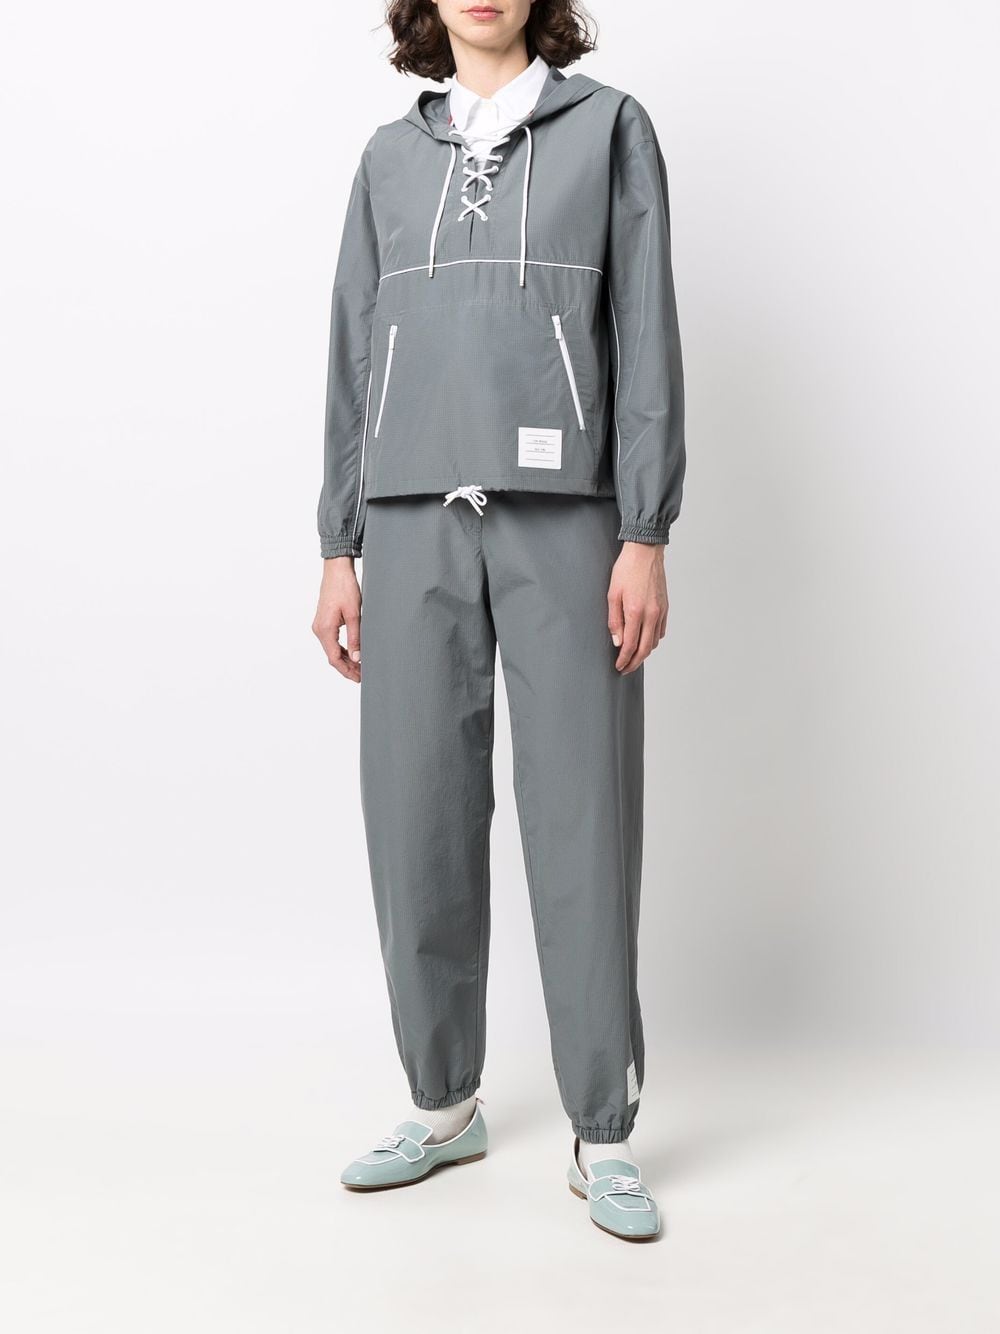 Thom Browne lace-up Hooded Jacket - Farfetch